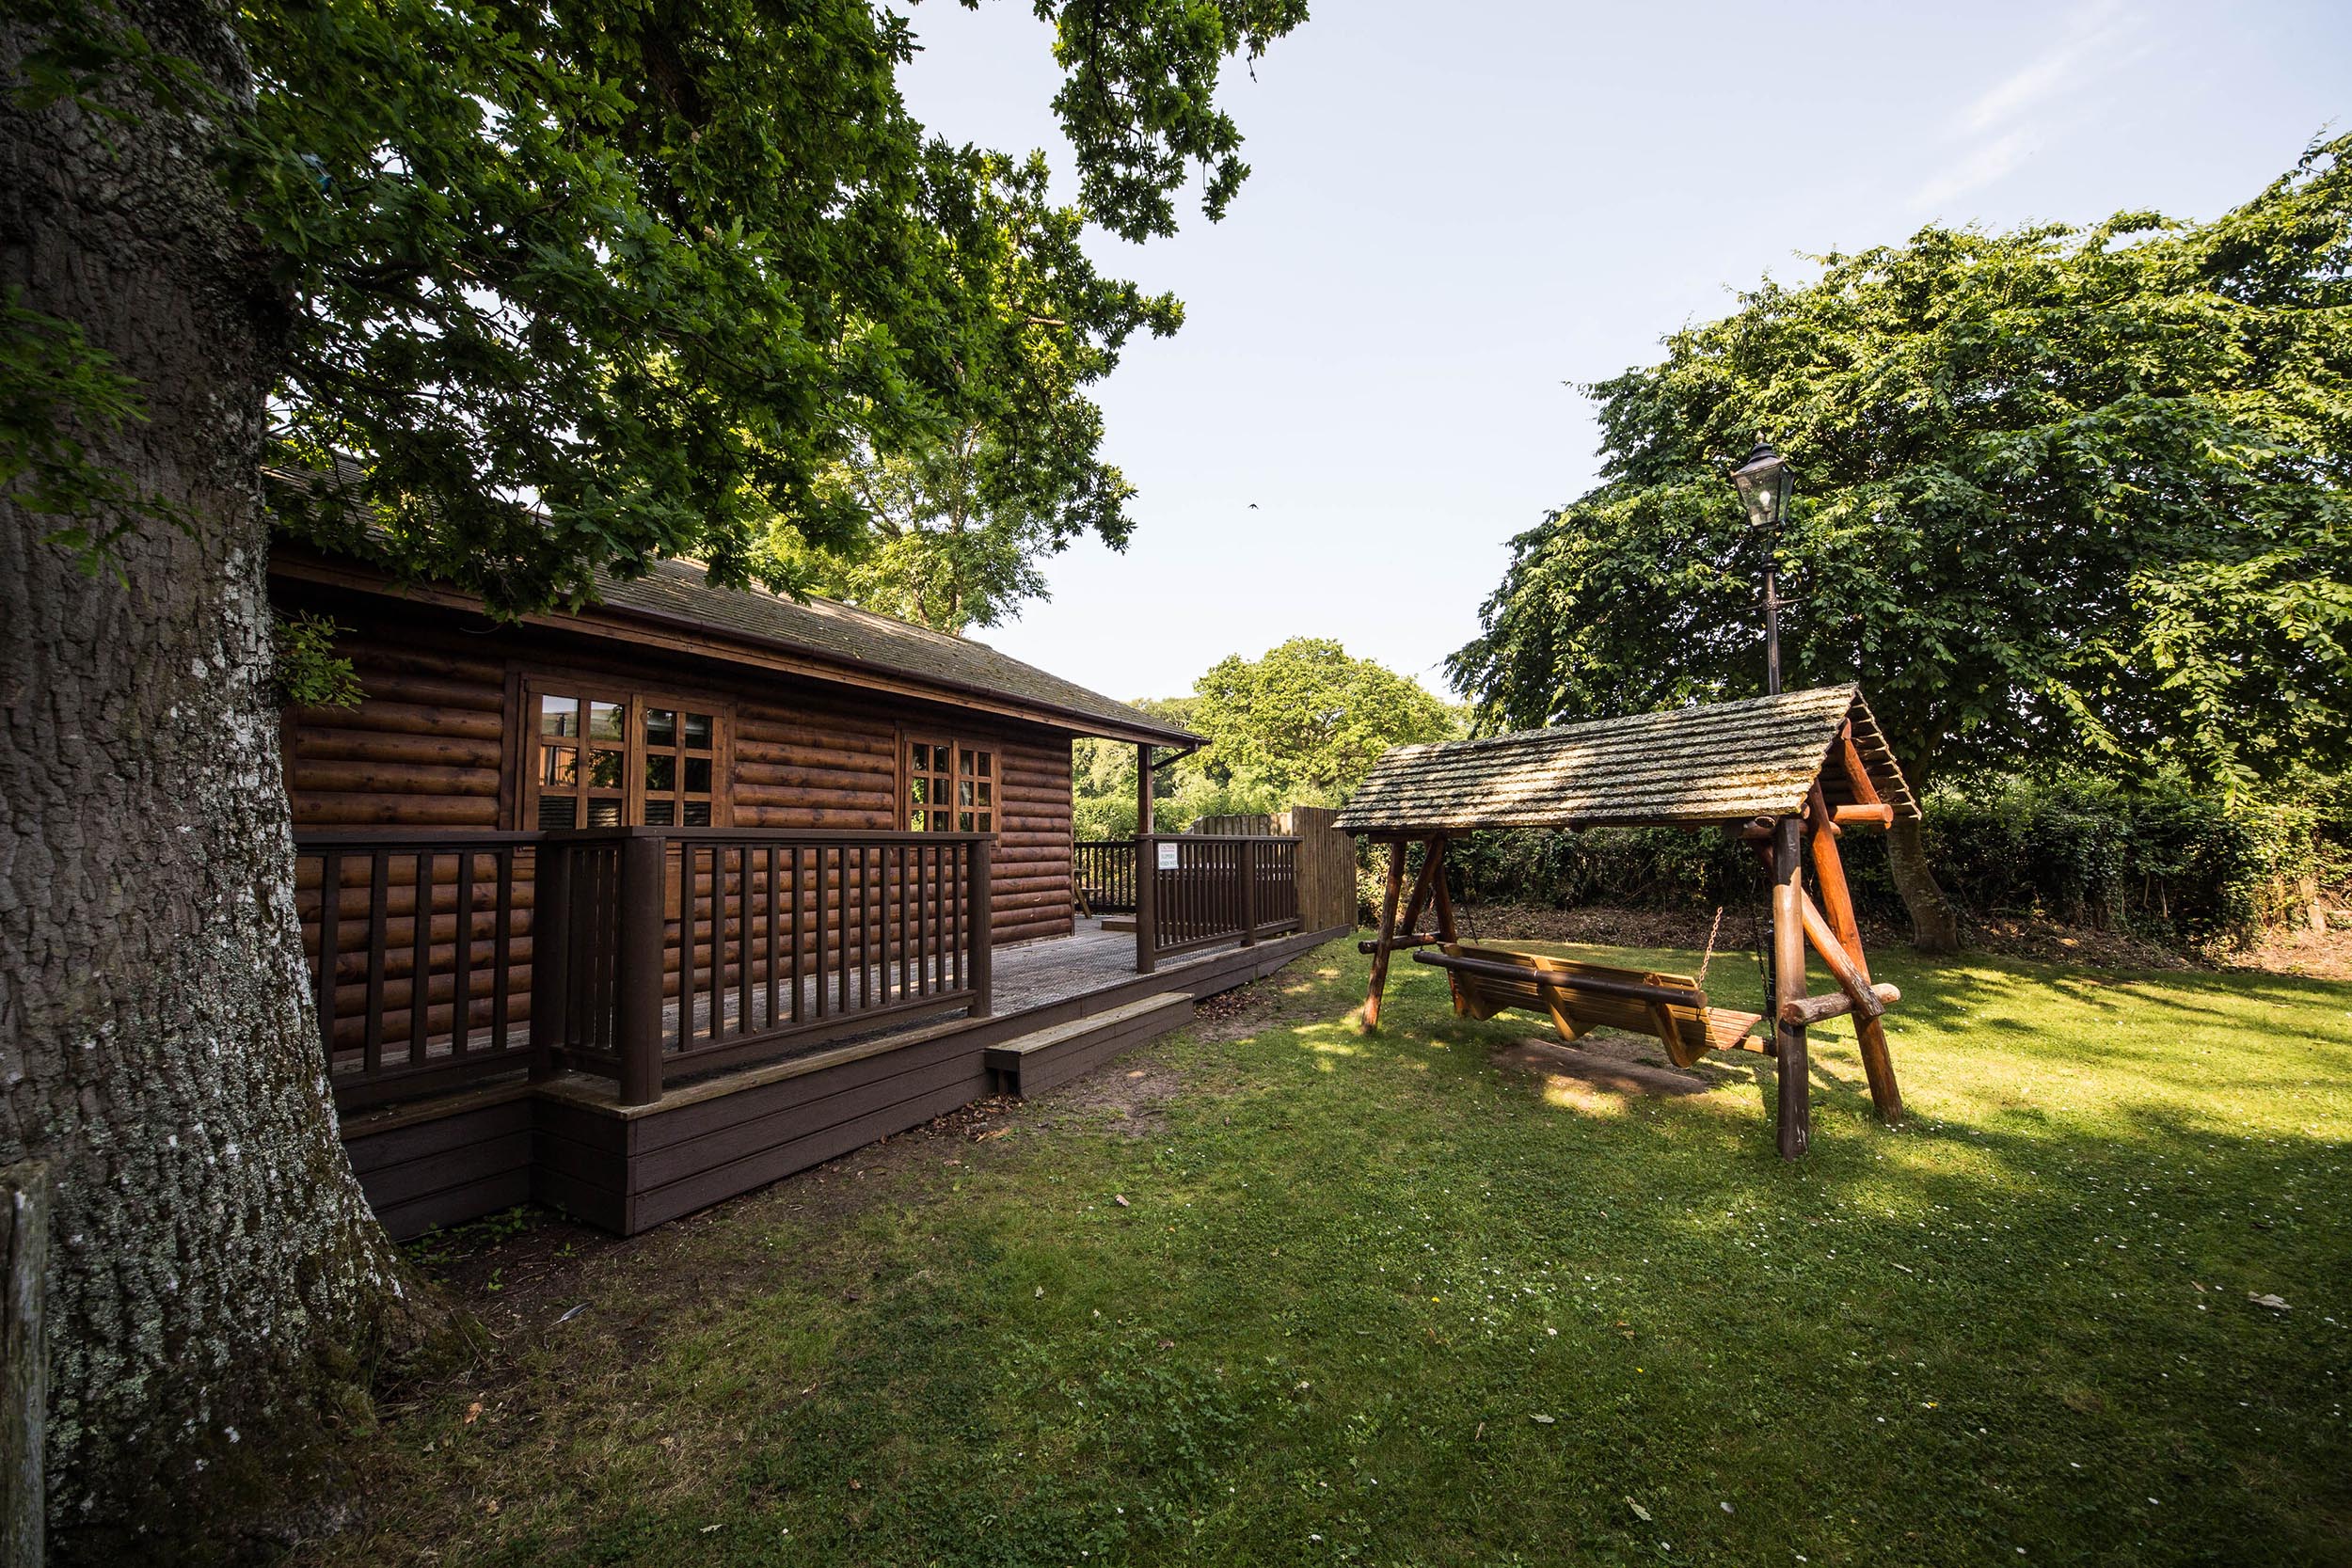 Accommodation options include hot tubs, wood burners and private gardens